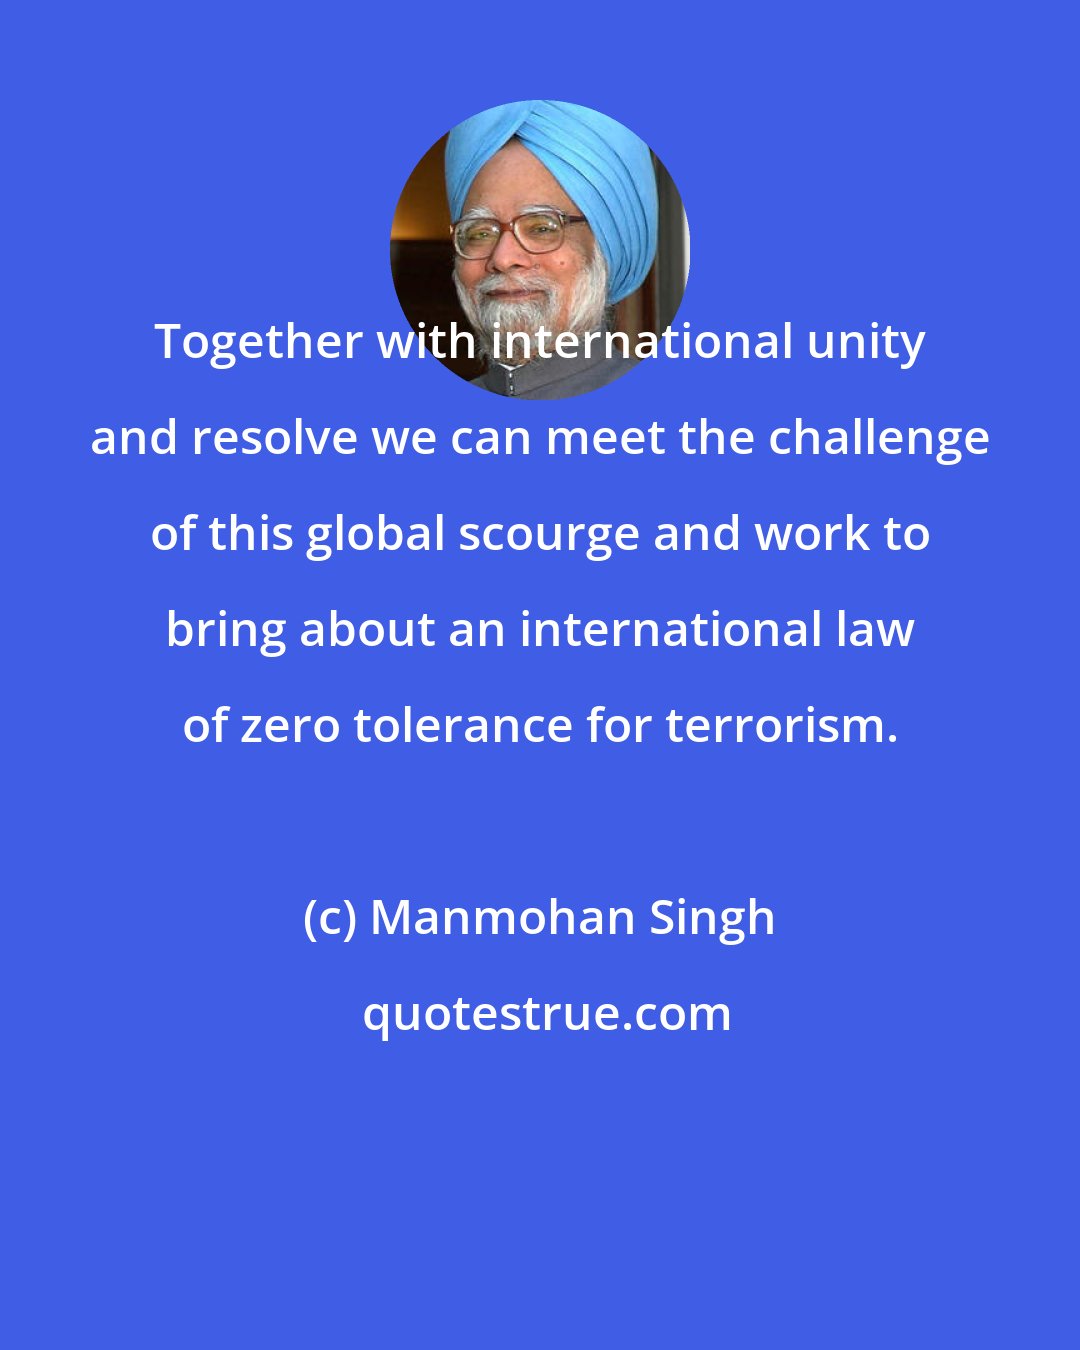 Manmohan Singh: Together with international unity and resolve we can meet the challenge of this global scourge and work to bring about an international law of zero tolerance for terrorism.